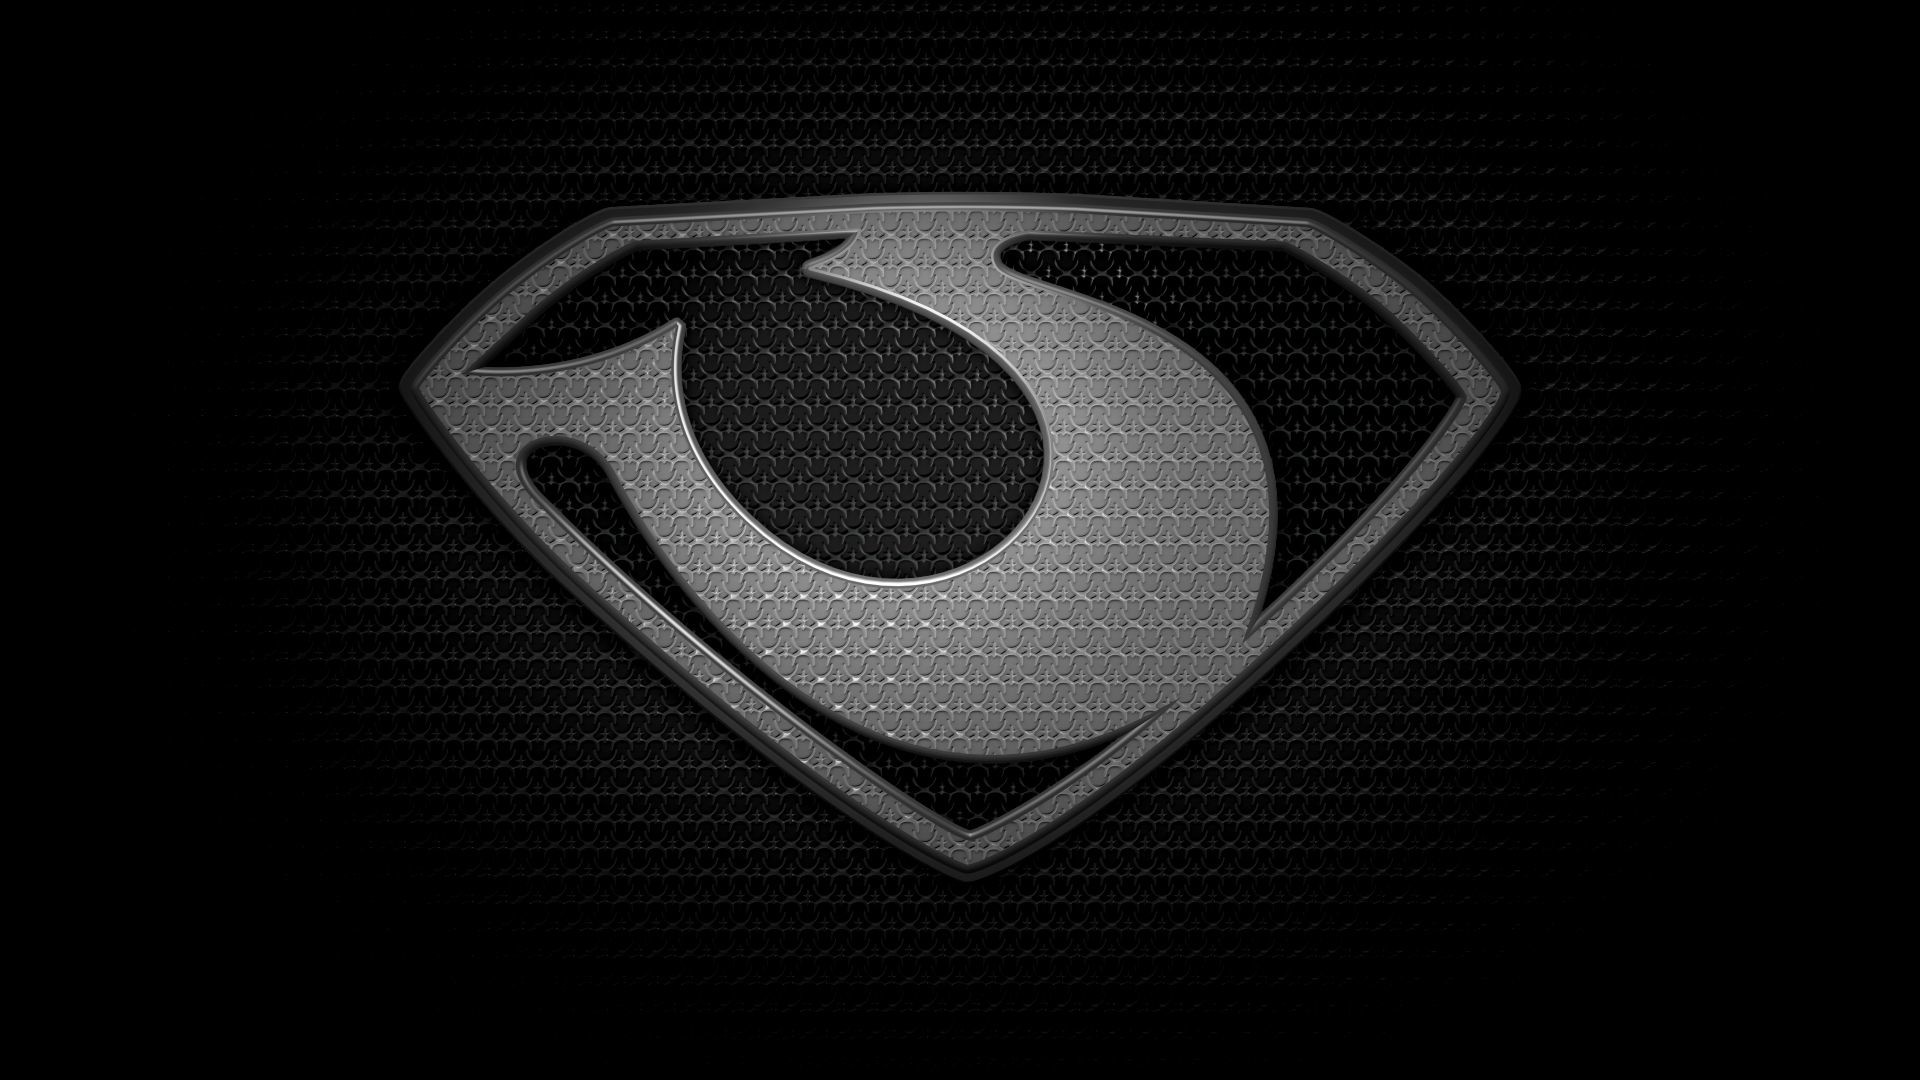 1920x1080 Search Results for “general zod logo wallpaper” – Adorable Wallpapers